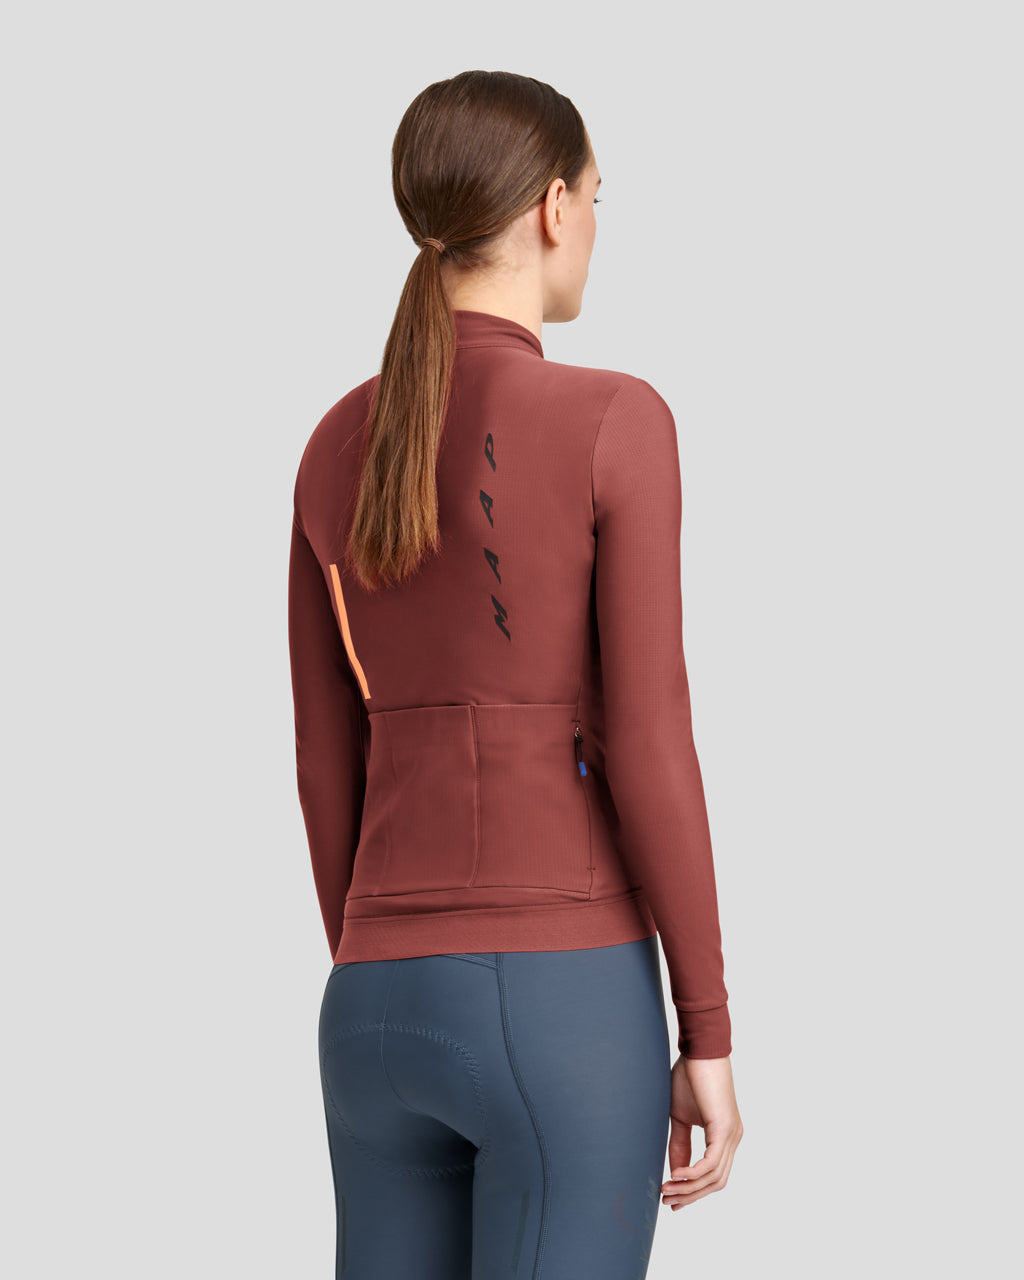 Women's Evade Thermal LS Jersey